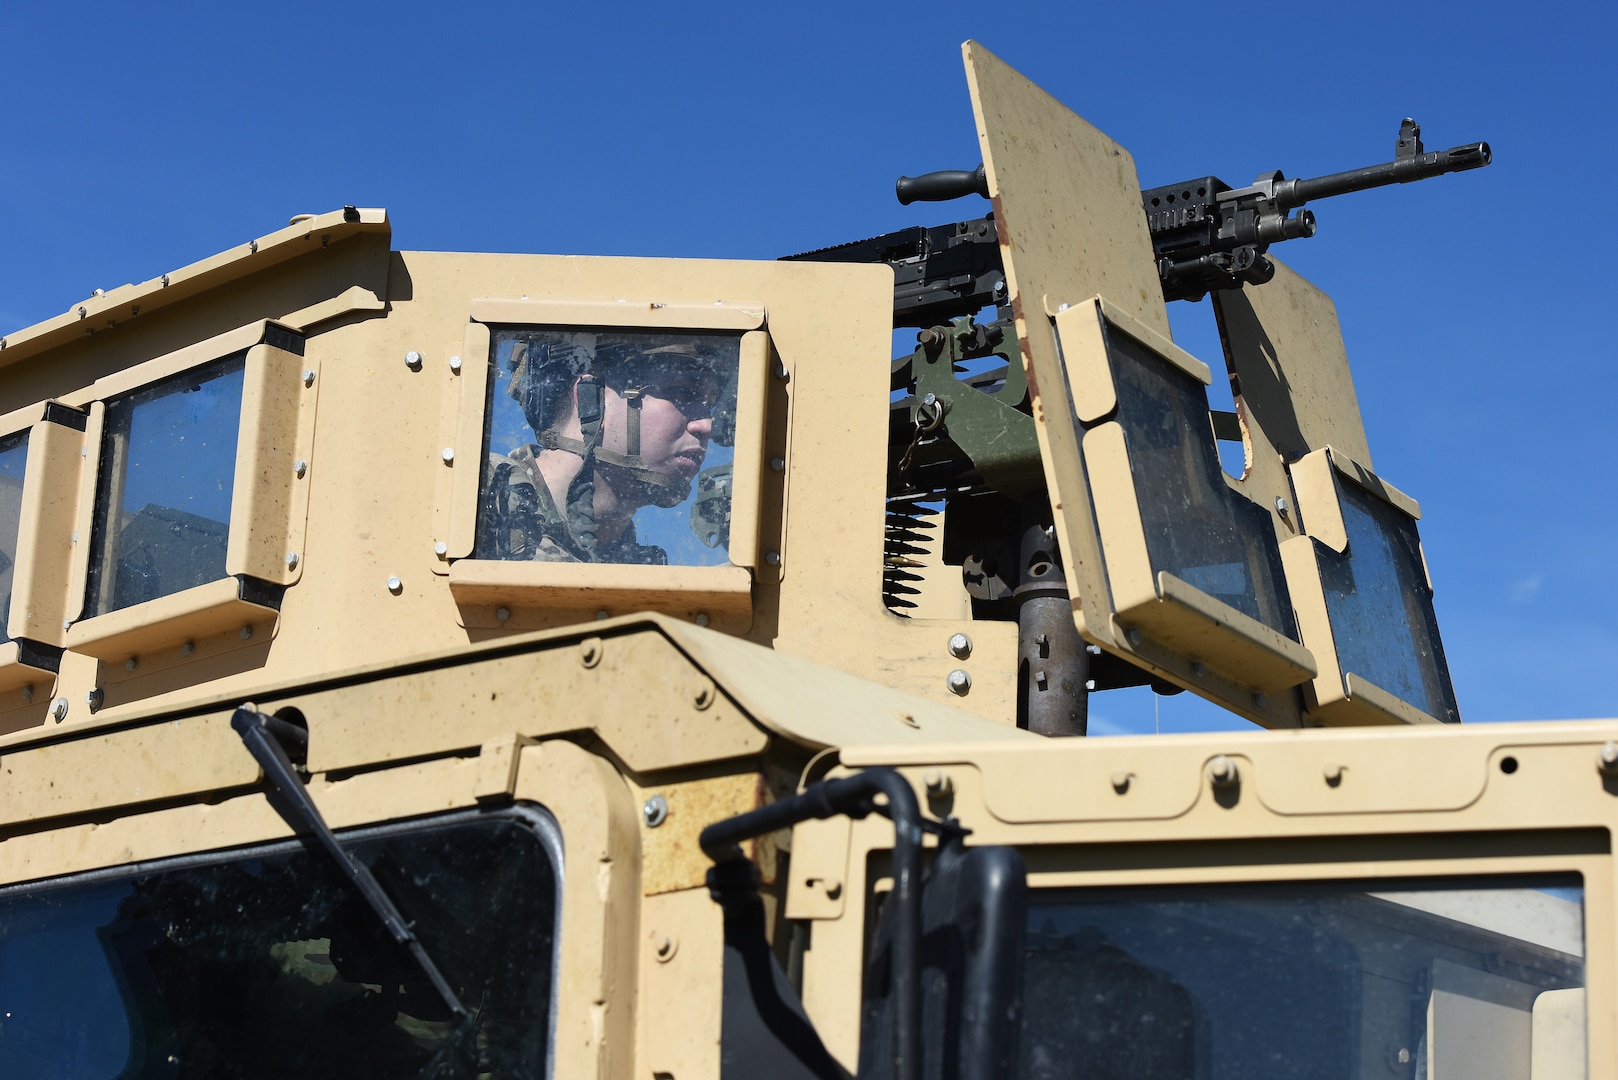 Airman 1st Class Evan Tomasko, 841st Missile Security Forces Squadron missile security operator, mans a turret in a Humvee during an integrated recapture and recovery exercise June 11, 2019, at an intercontinental ballistic missile launch facility near Simms, Mont.